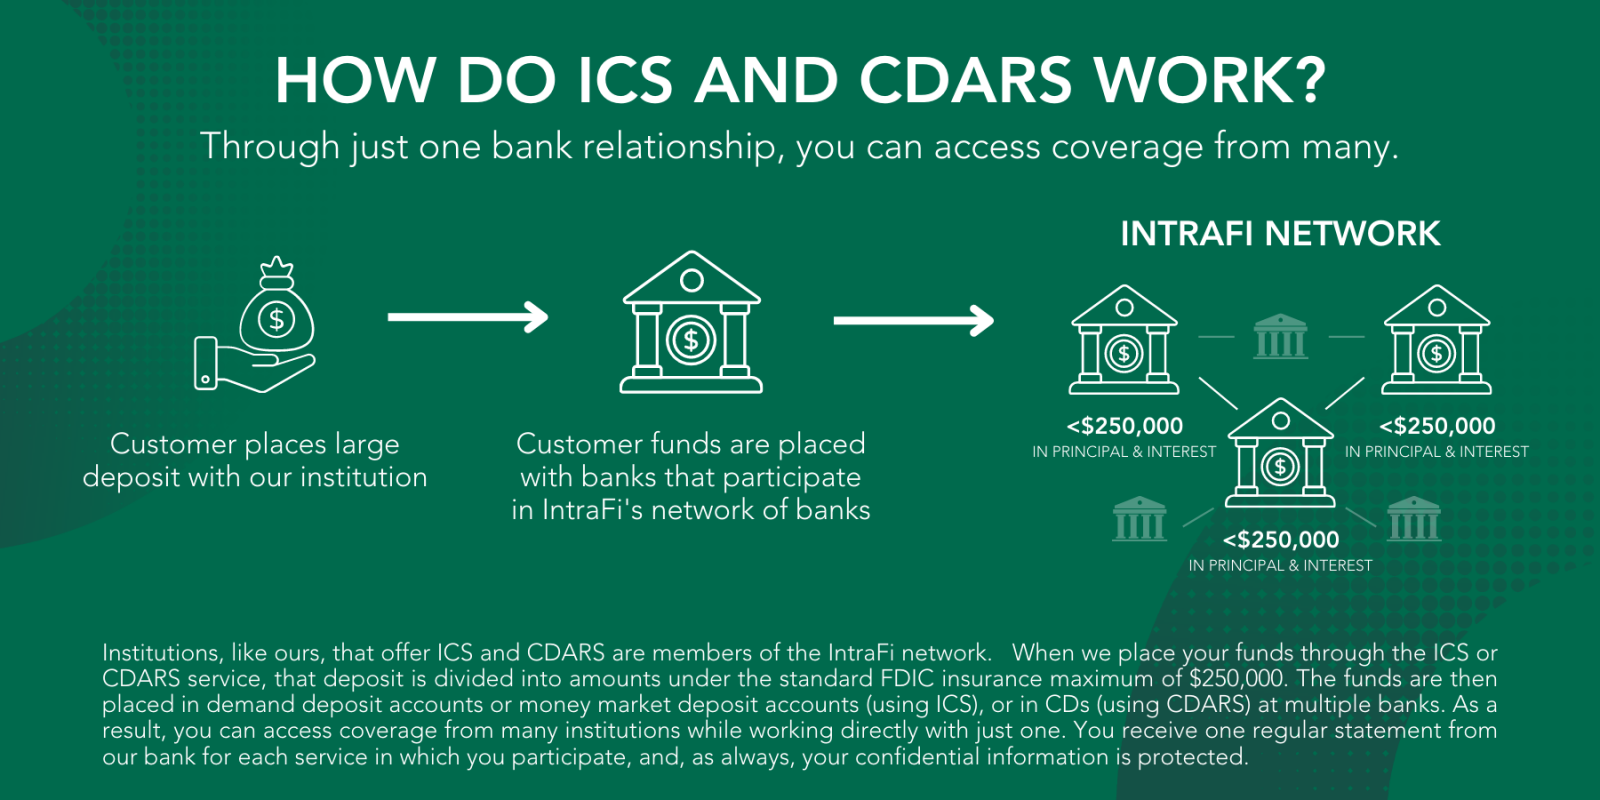 Infographic explaining how ICS and CDARS work